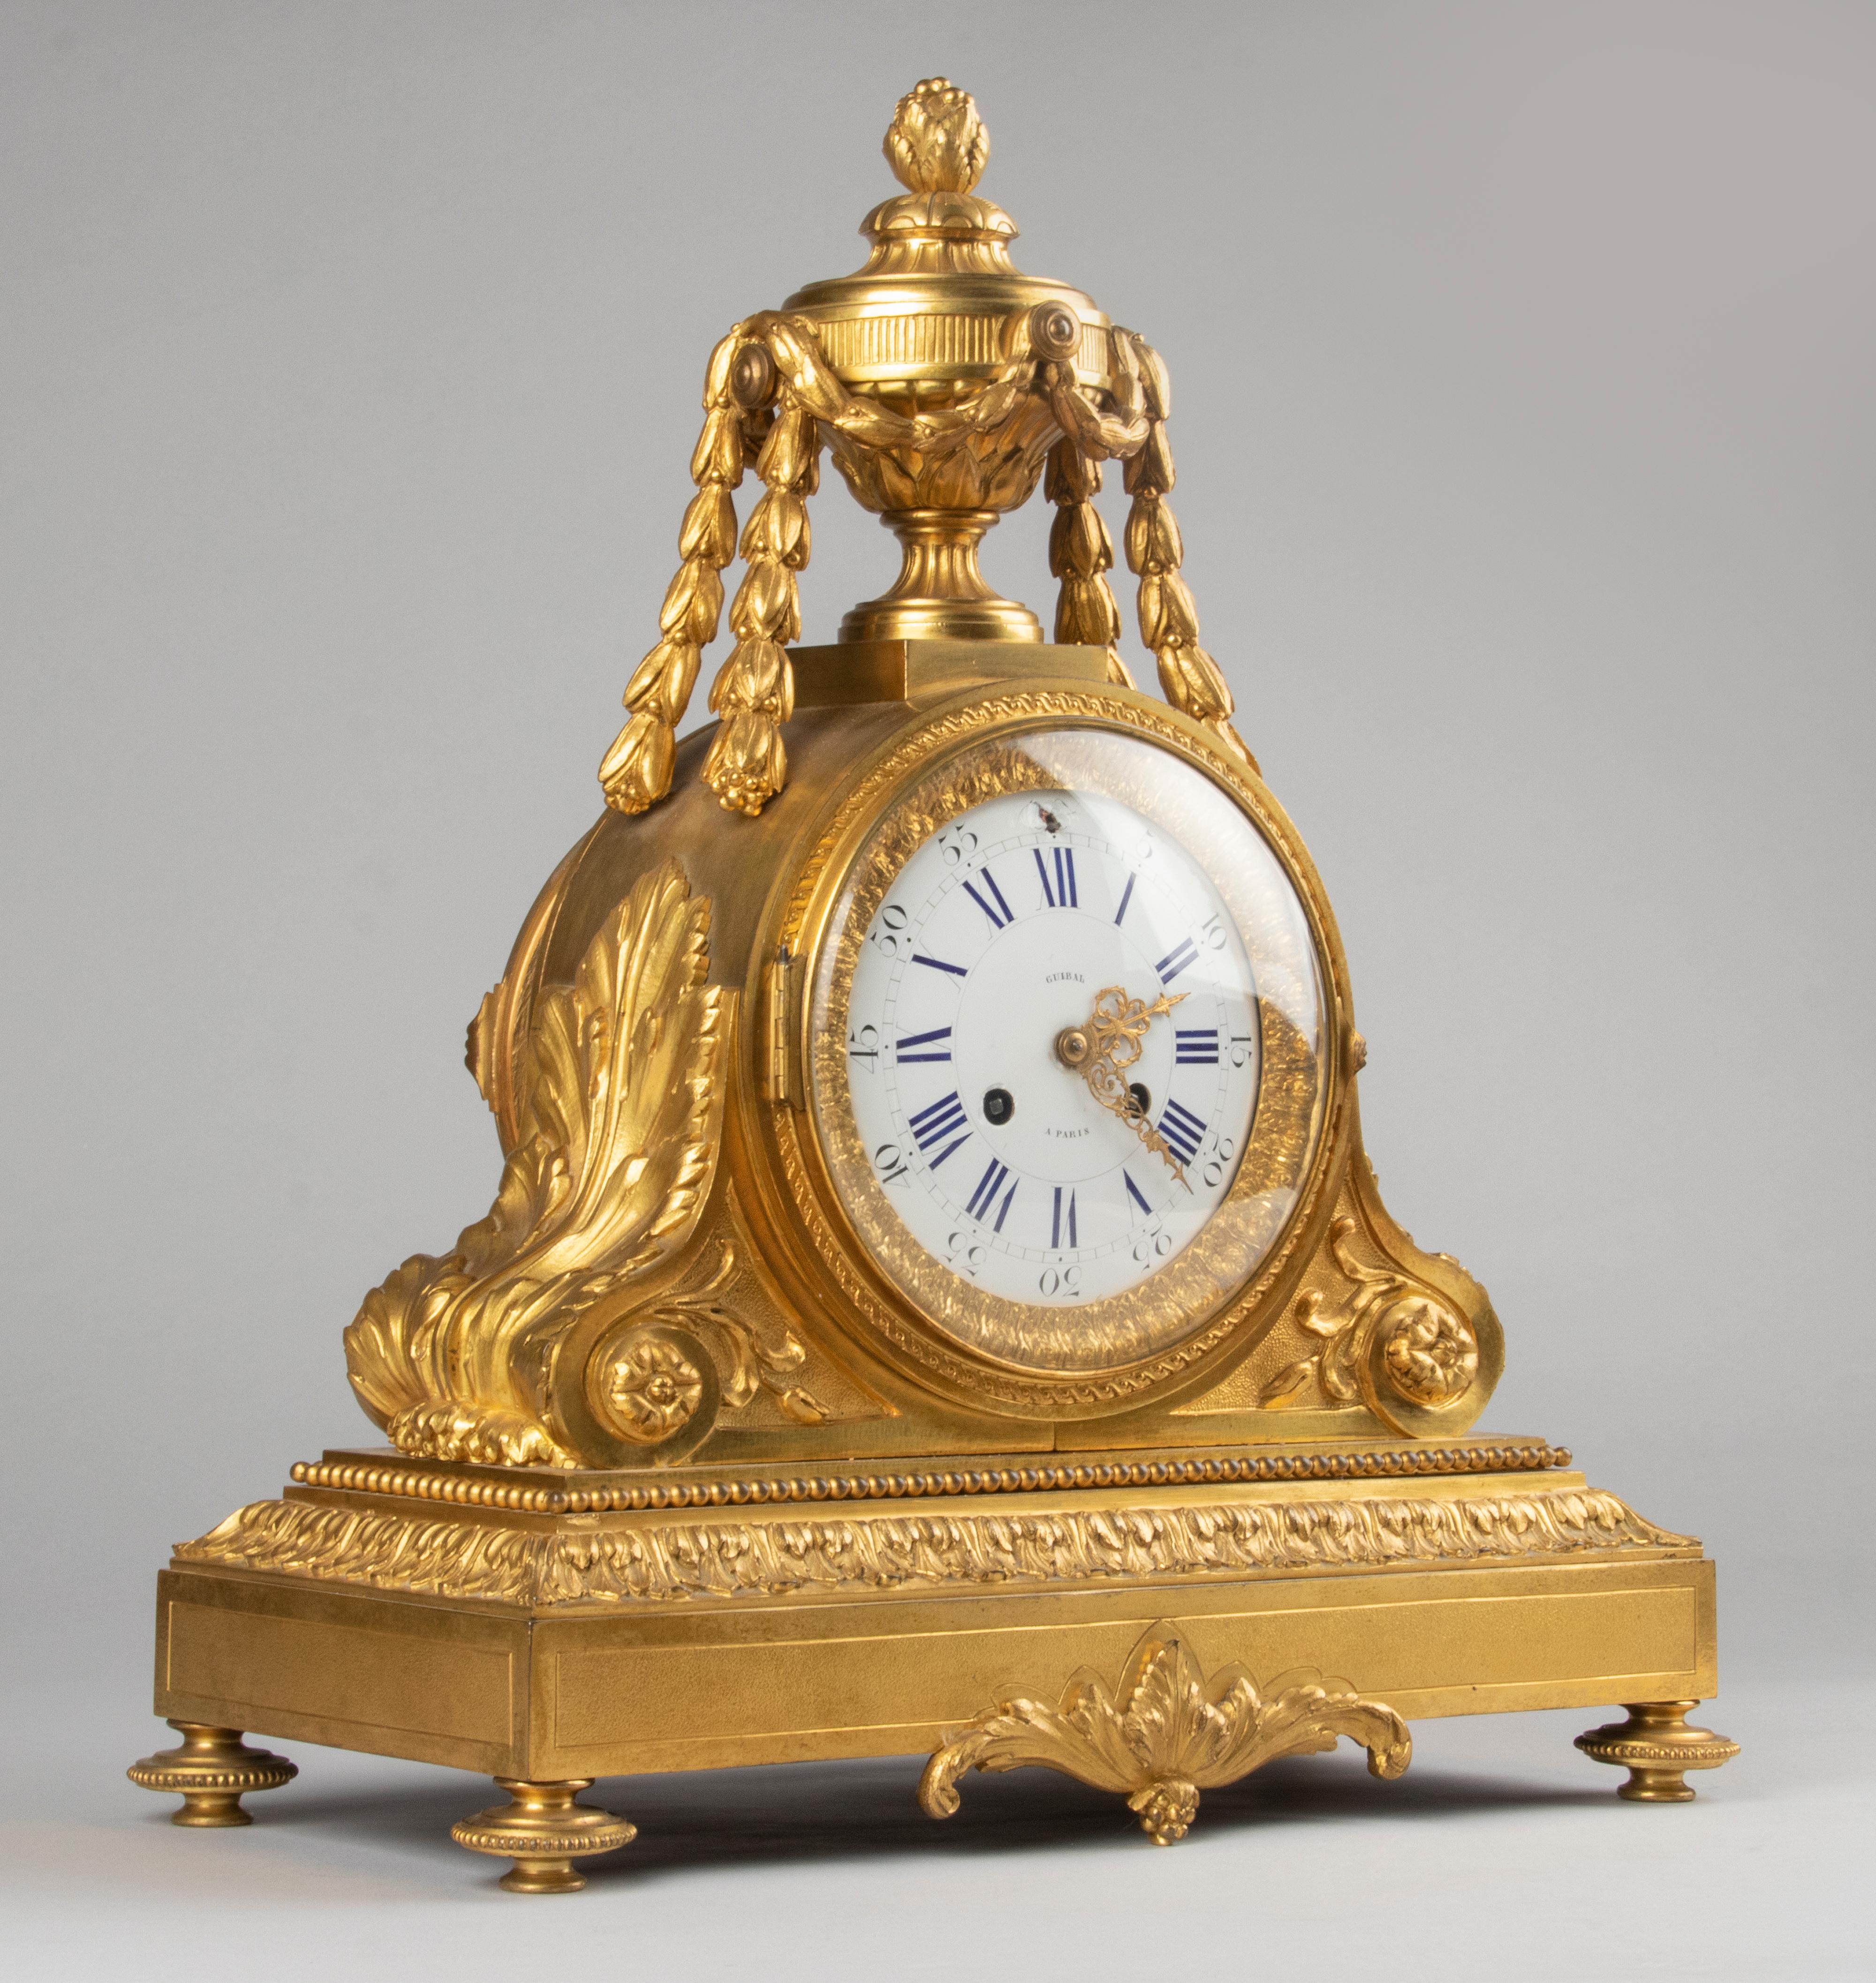 A fine and large Louis XVI style French mantel clock, from the end of the Napoleon III period, 1870-1880. The clock is bronze casted and has a fire-gilded finish, the dial is enameled copper. Richly all around embellished with neoclassical ornaments